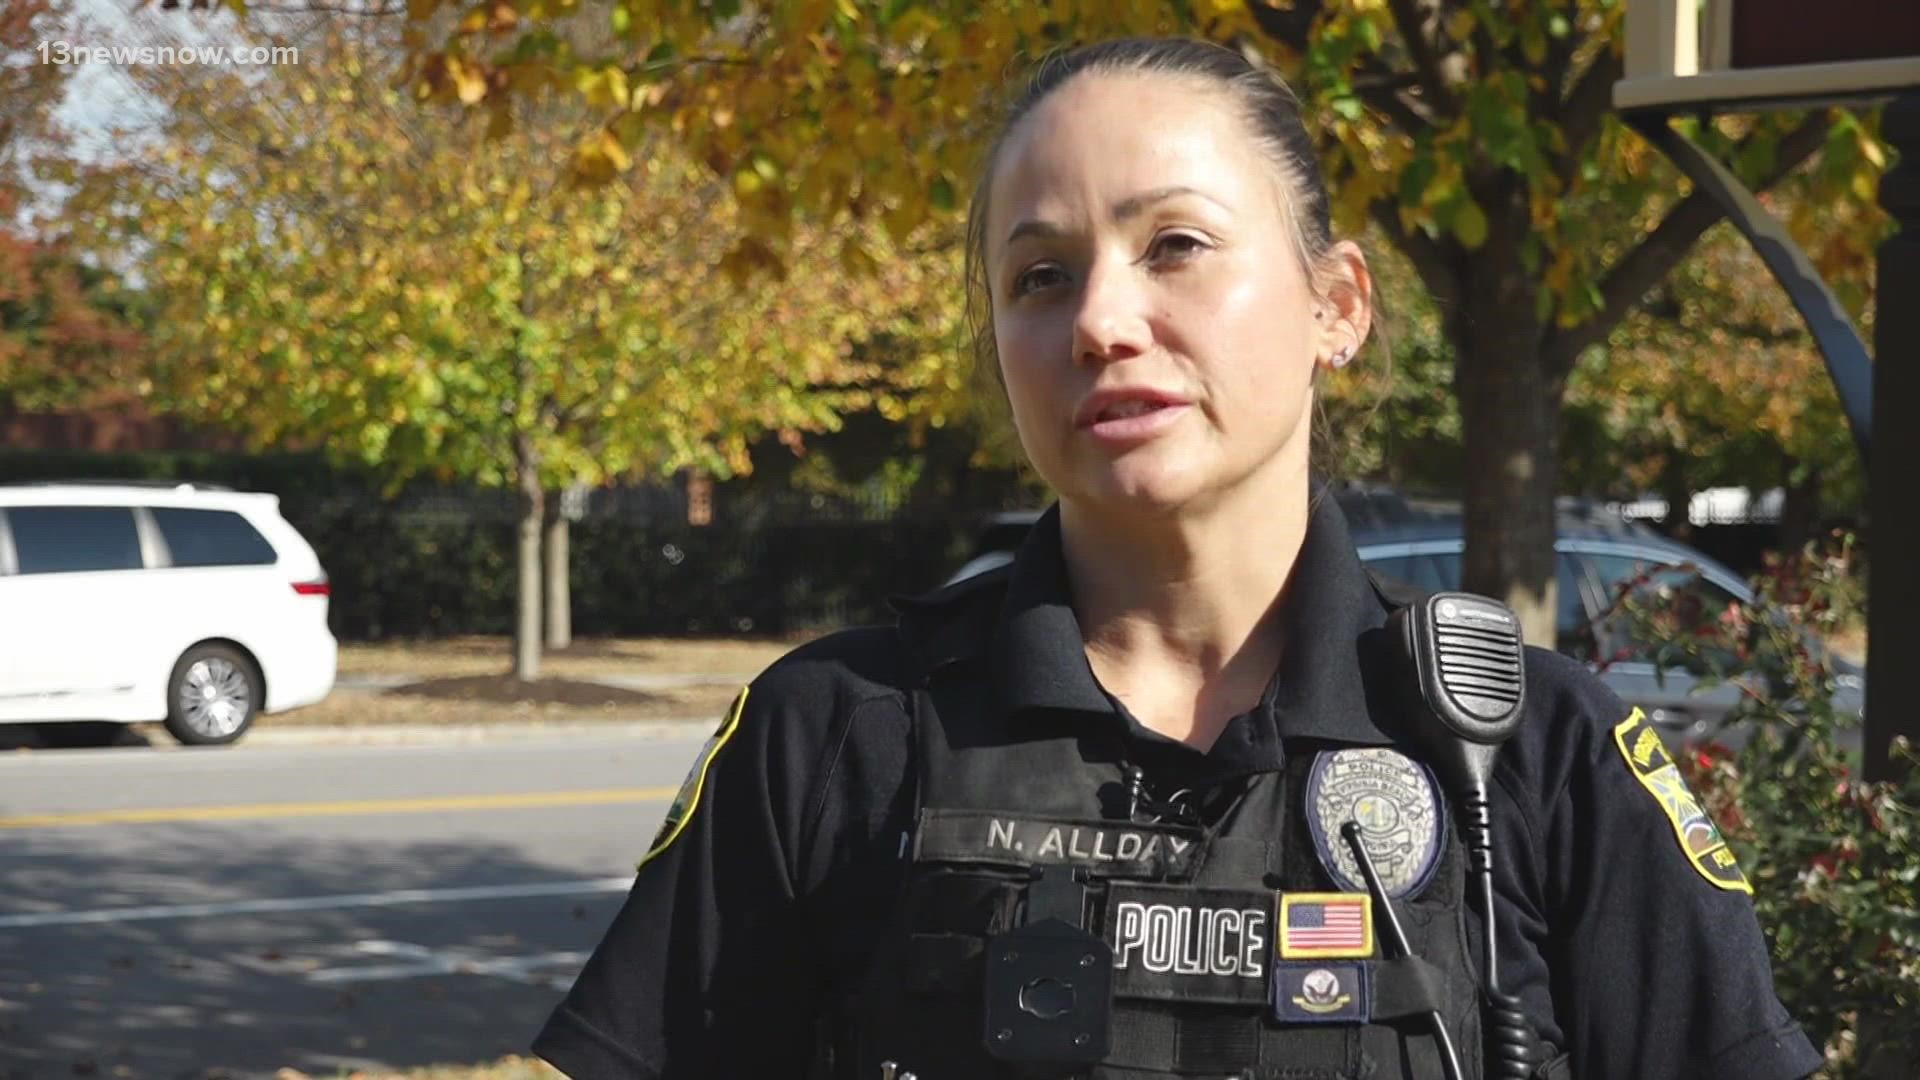 Officer Nicole Allday with the Virginia Beach Police Department said from January 1 to November 17, 2021 there were more than 2,000 thefts from cars in the city.